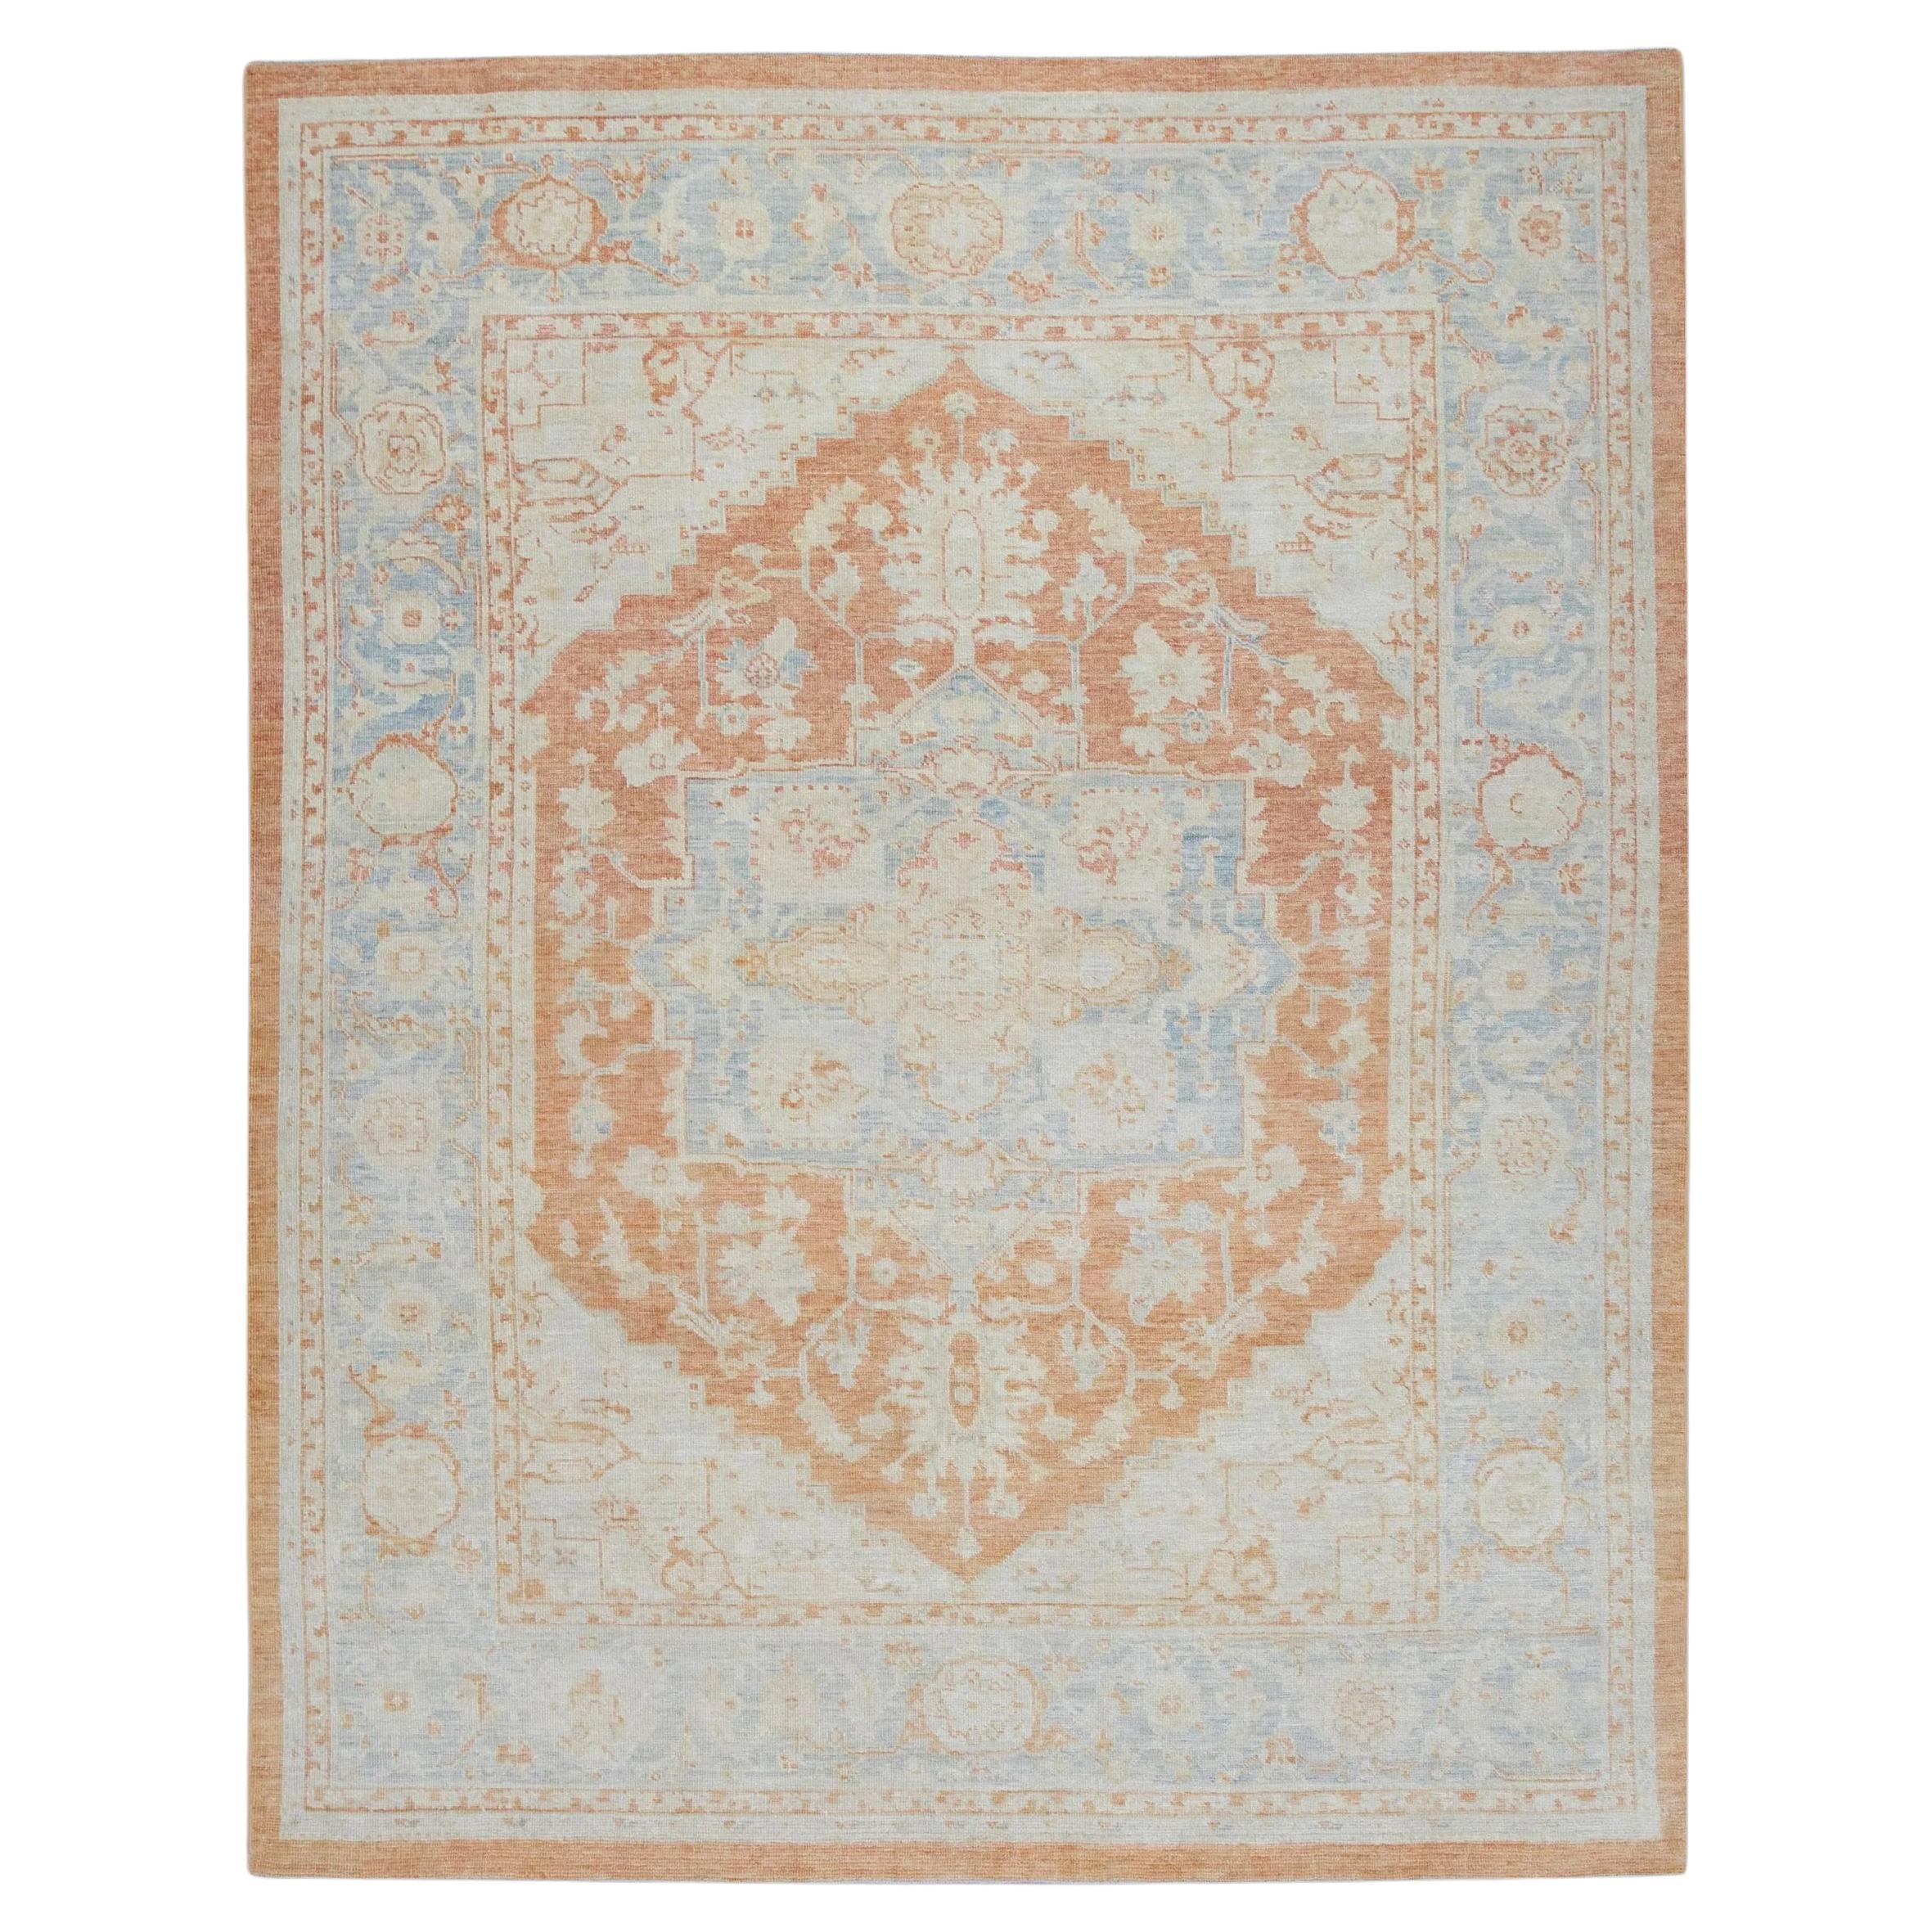 Floral Turkish Finewoven Wool Oushak Rug in Salmon Pink and Baby Blue 6'2" x 8' For Sale